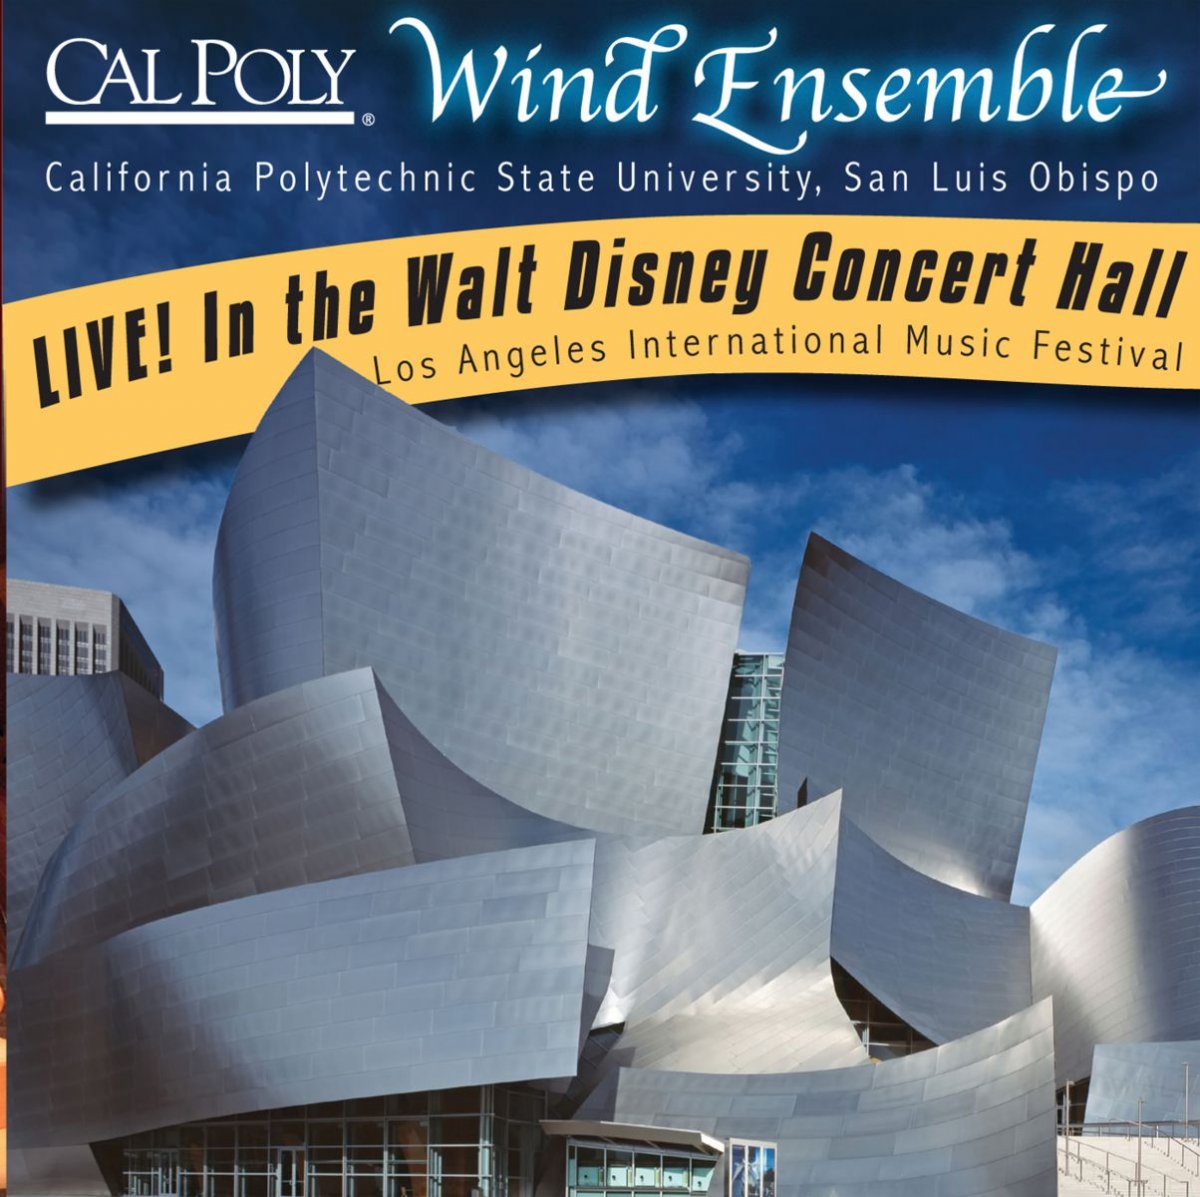 California Polytechnic State University Wind Ensemble Live! In the Walt Disney Concert Hall - click here